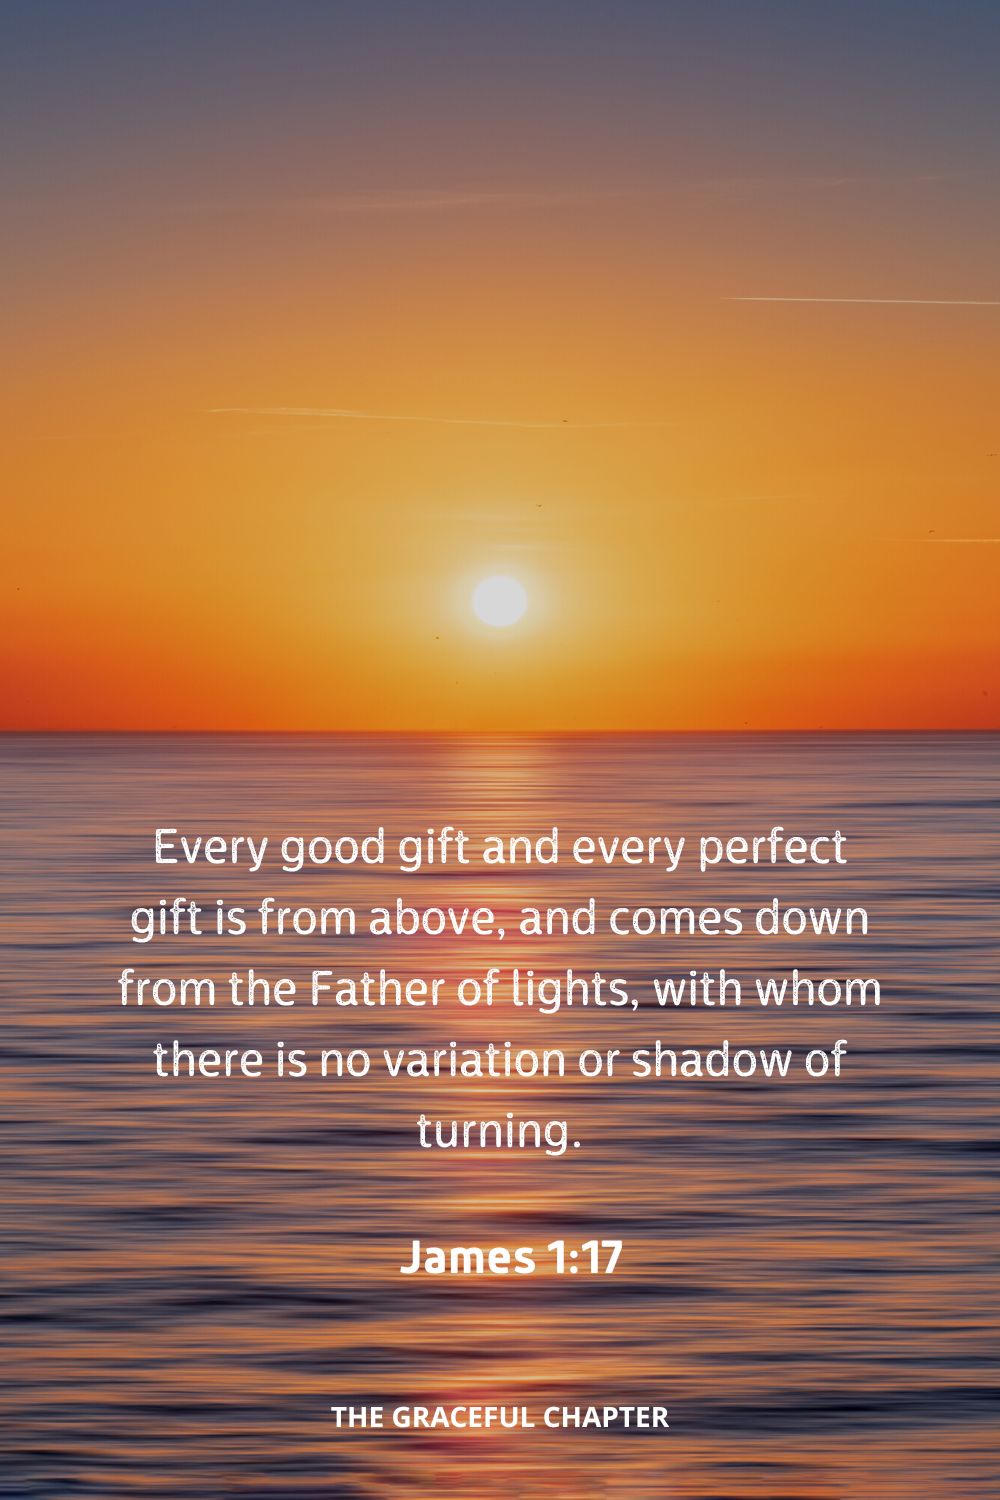 Every good gift and every perfect gift is from above, and comes down from the Father of lights, with whom there is no variation or shadow of turning.